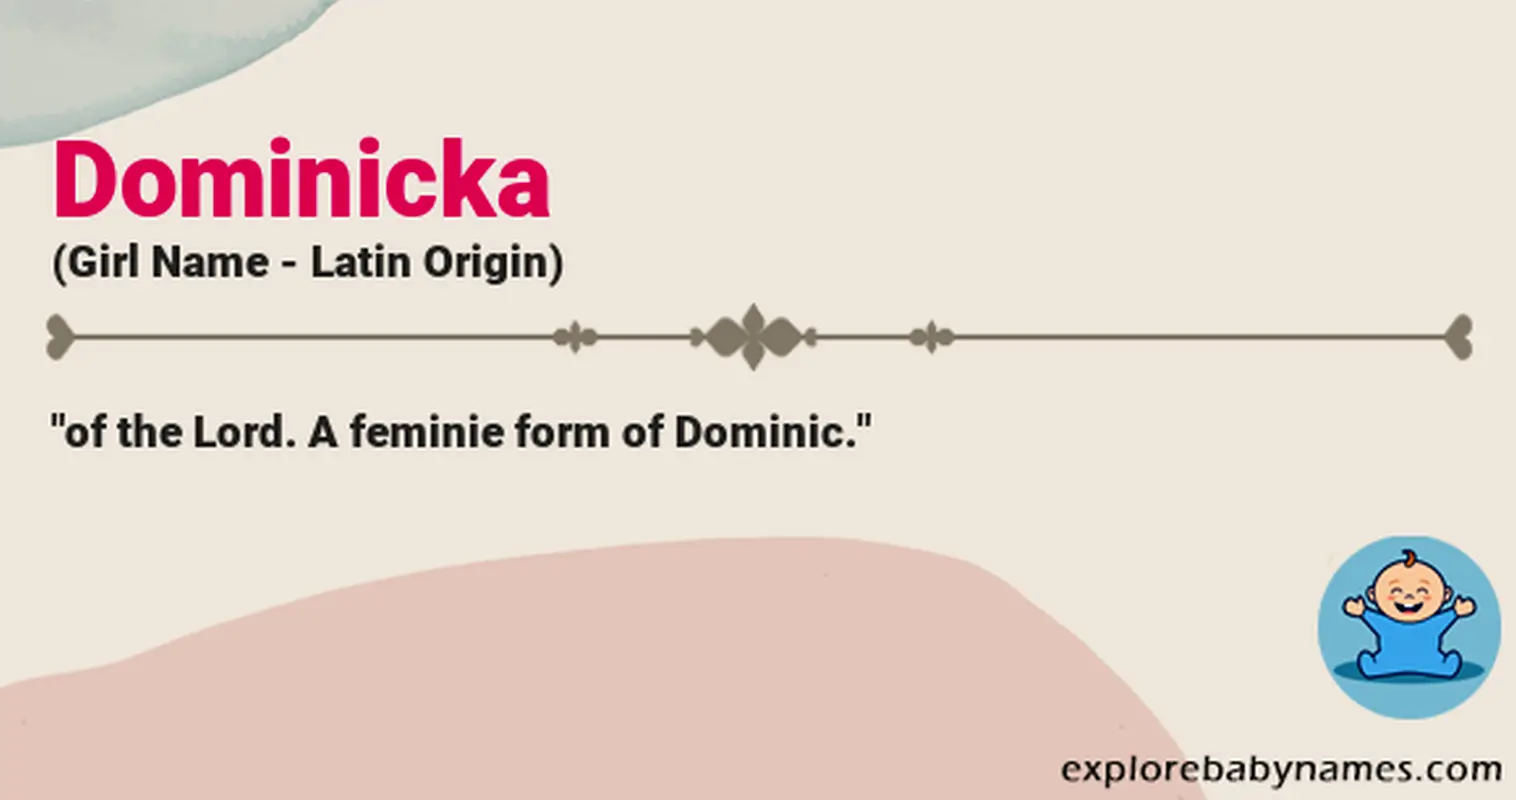 Meaning of Dominicka